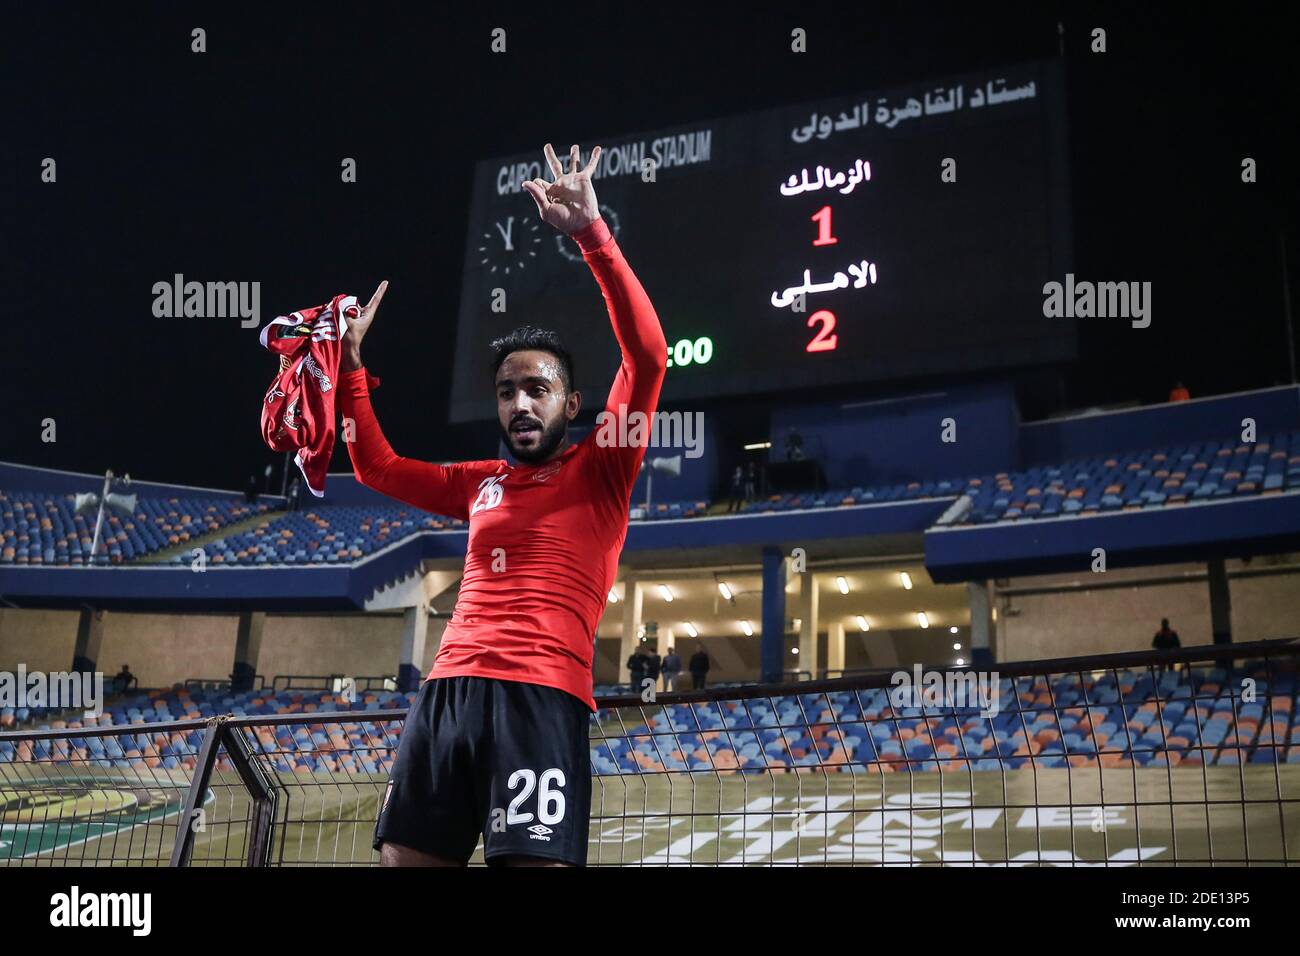 Cairo, Egypt. 27th Nov, 2020. Al Ahly's Kahraba is backdropped by the the score board as he celebrates at the final whistle of the African Champions League Final soccer match against Zamalek at Cairo International Stadium. Credit: Sameh Abo Hassan/dpa/Alamy Live News Stock Photo